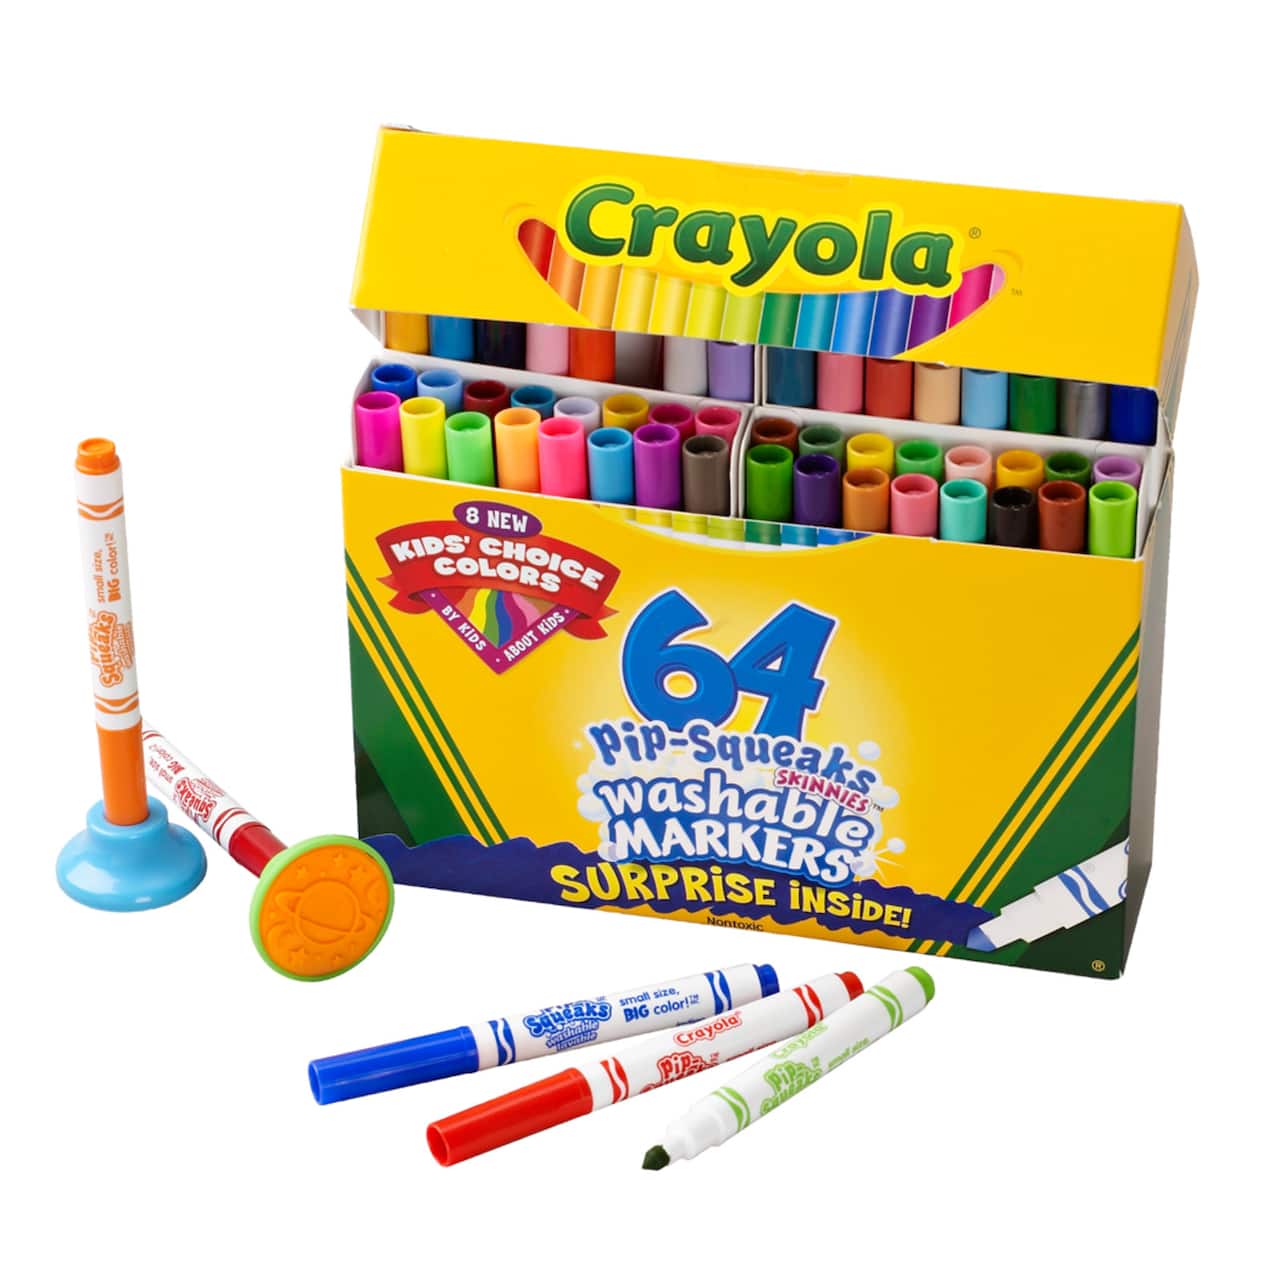 Crayola® Pip-Squeaks Skinnies Washable Markers, 64ct.